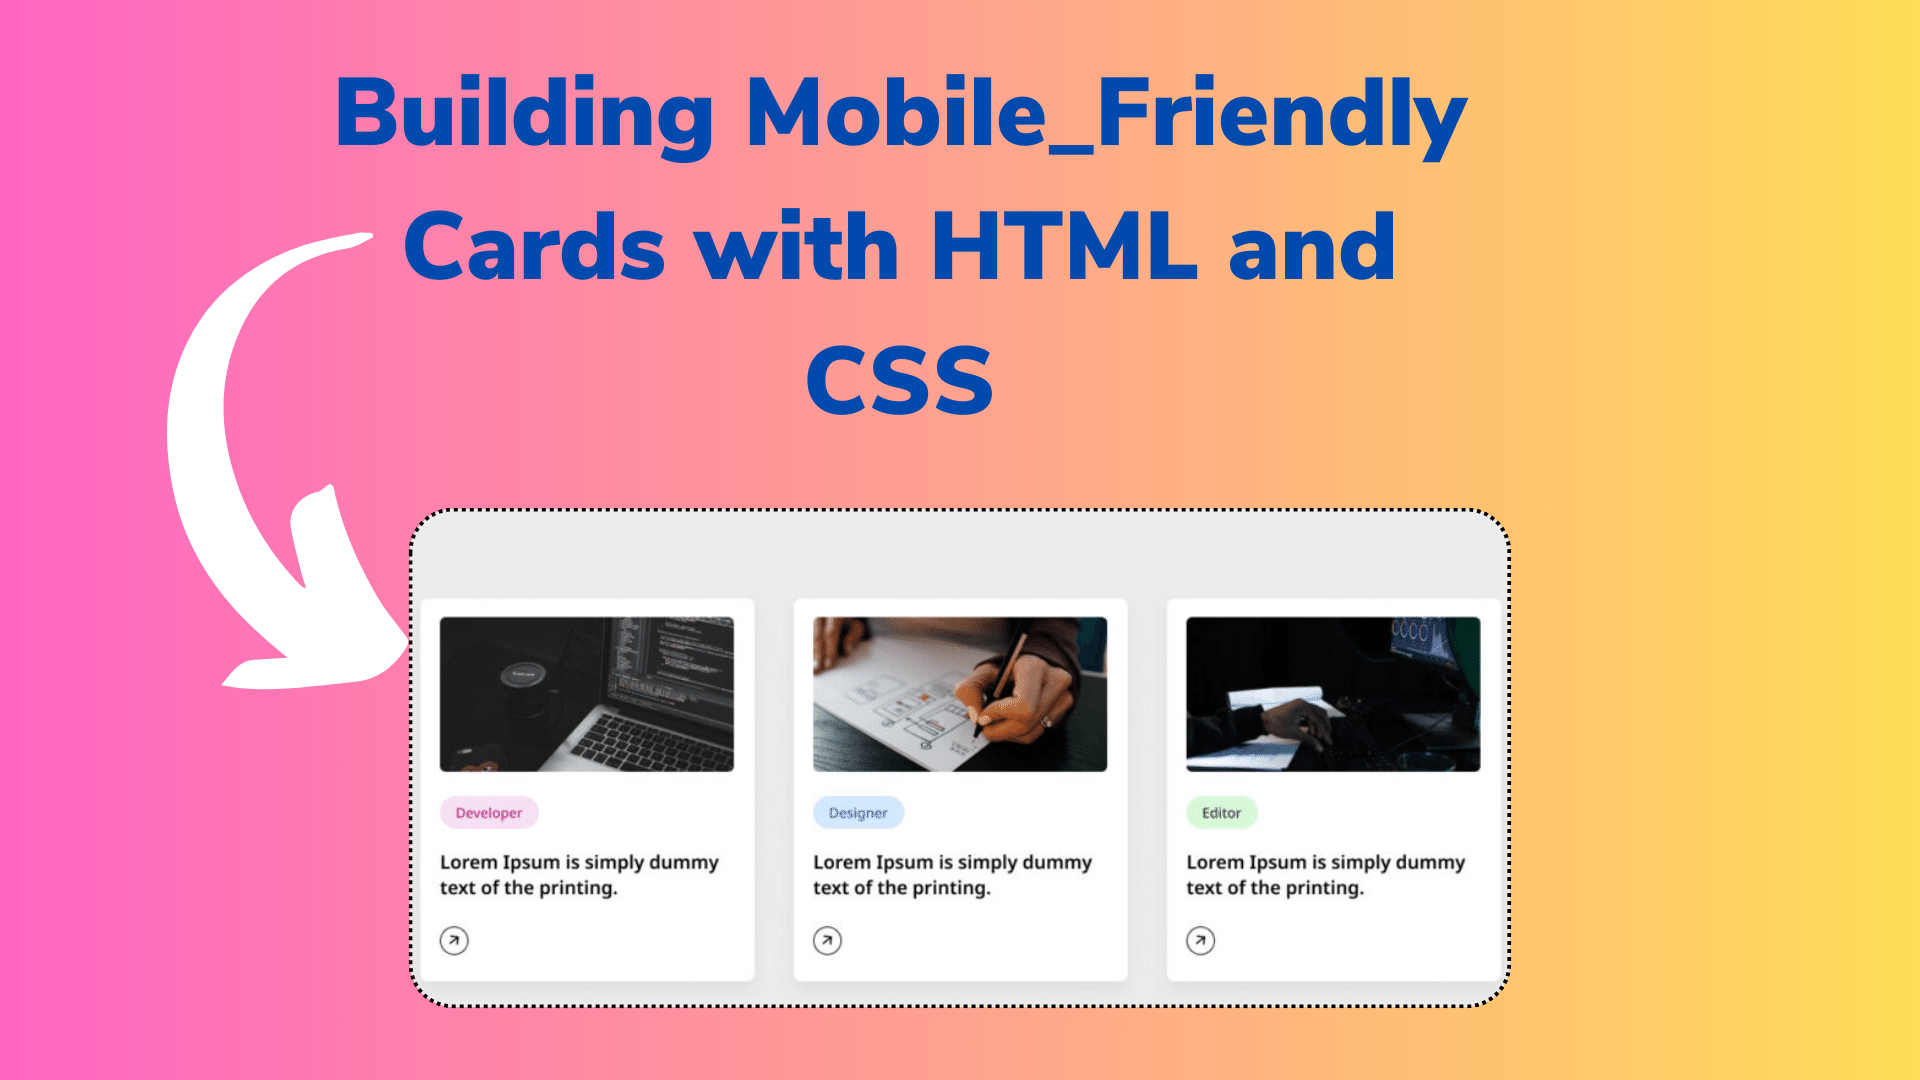 Building Mobile-Friendly Cards with HTML and CSS